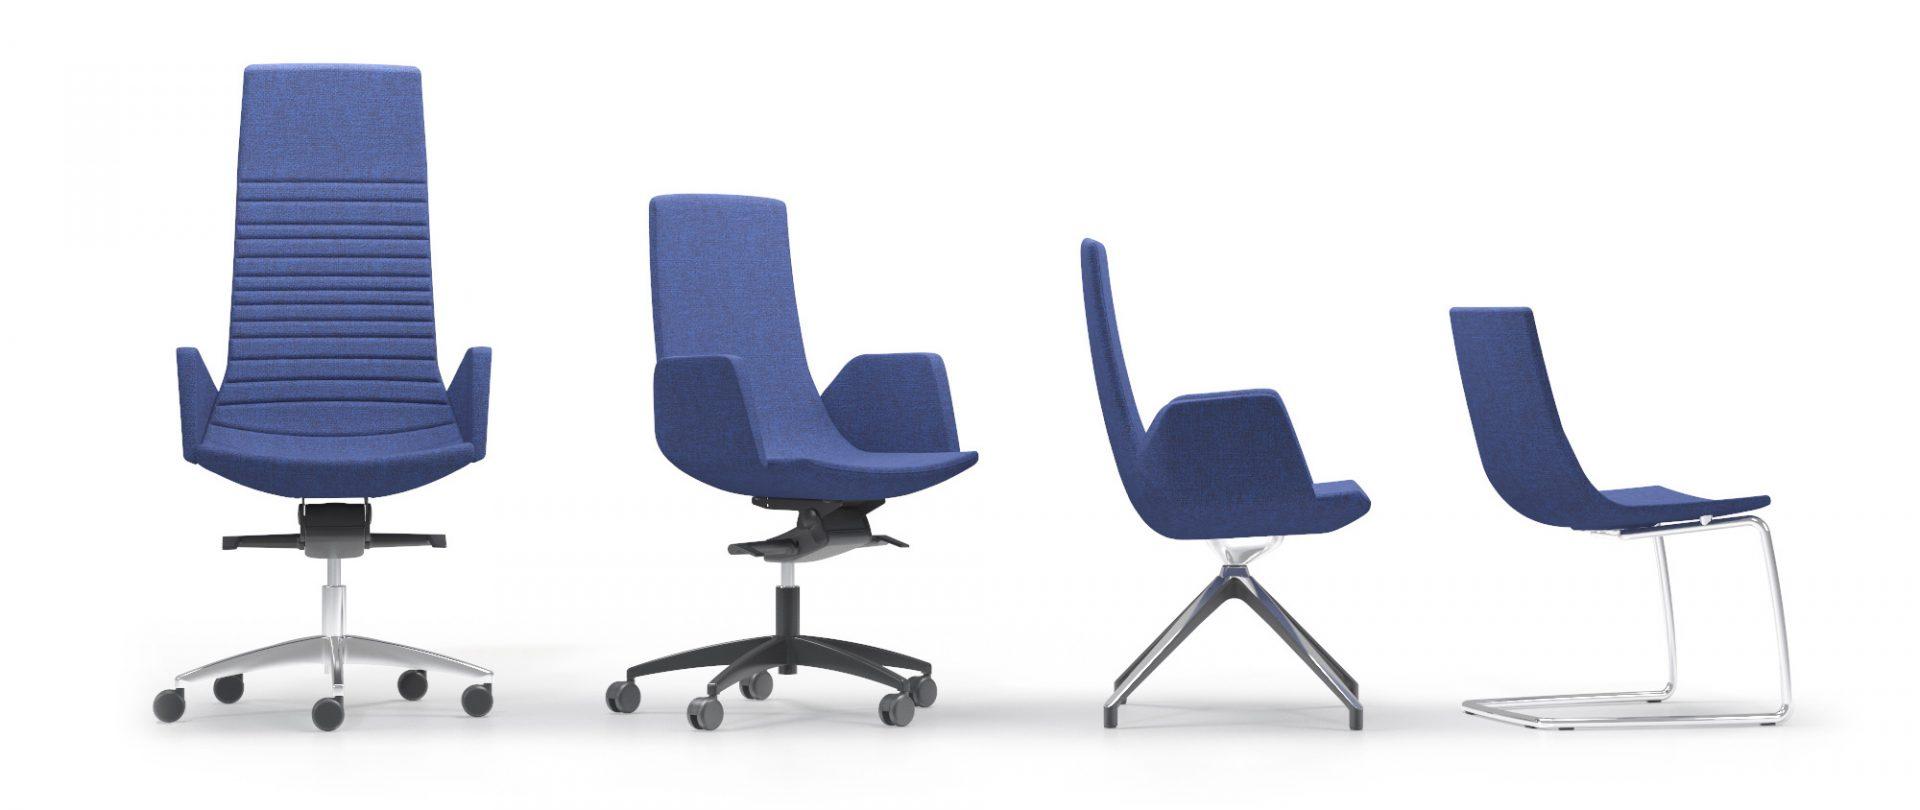 The range of executive, visitor and meeting chairs from the Northcape range